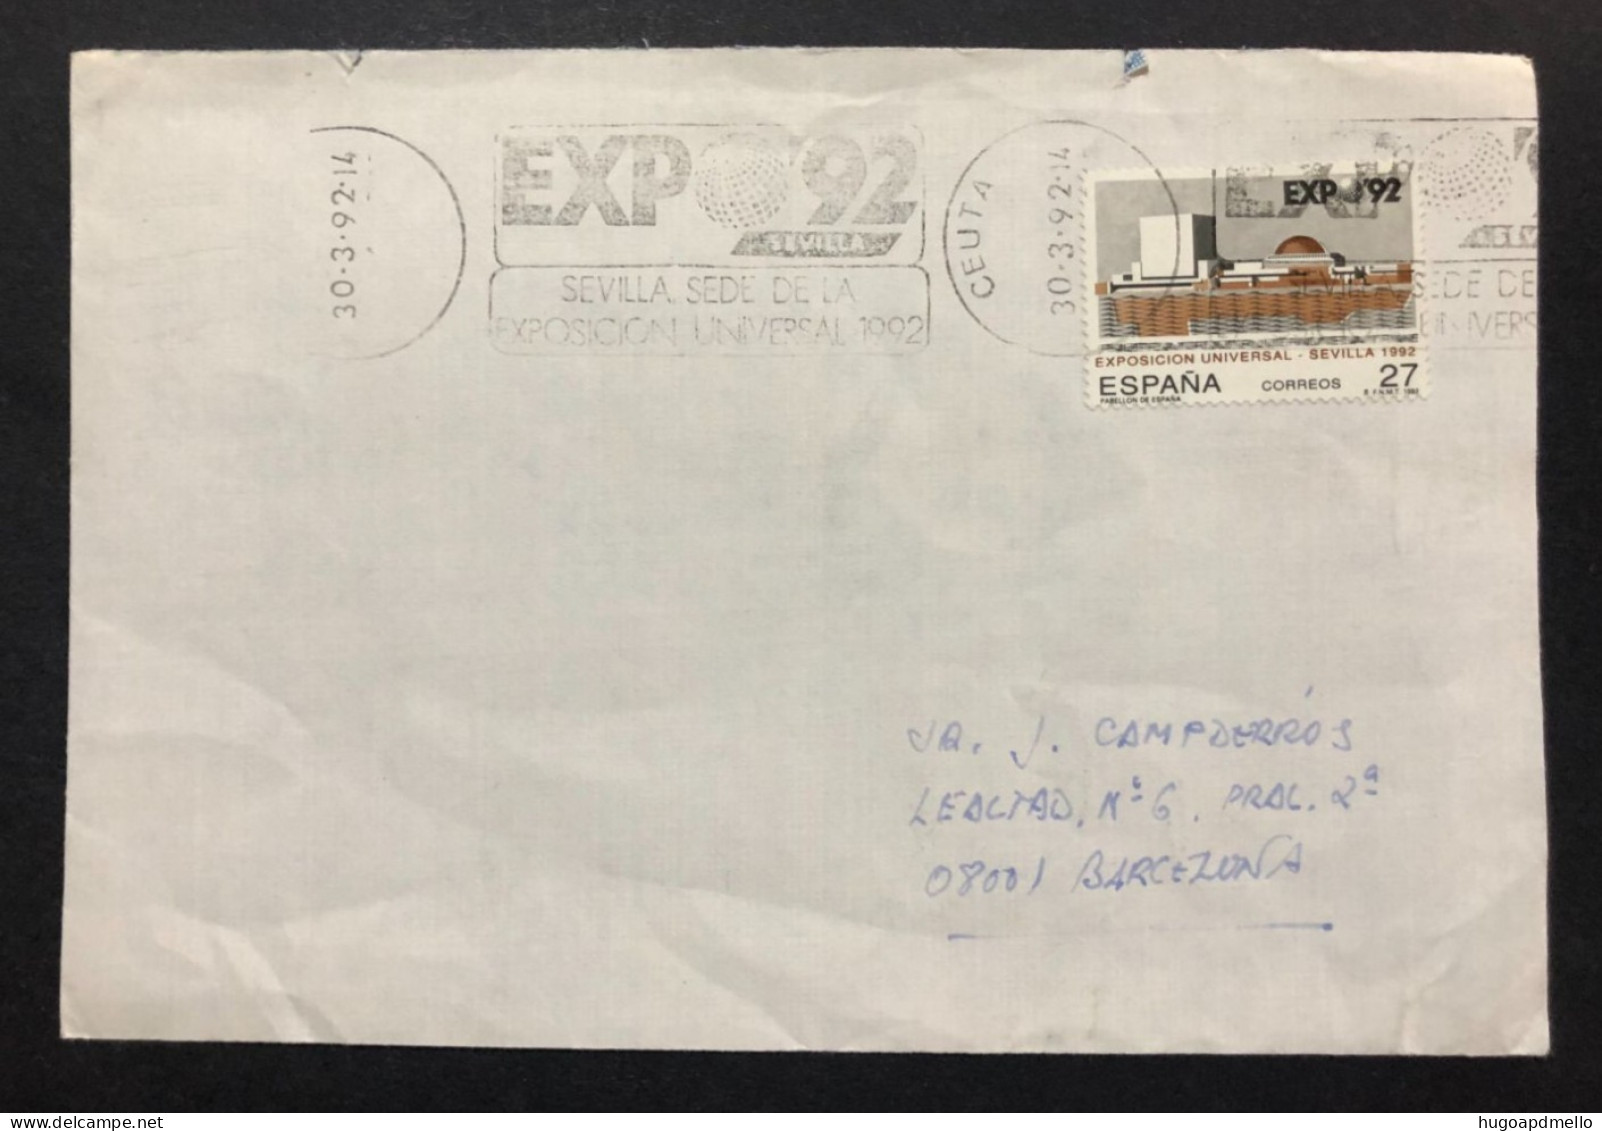 SPAIN, Cover With Special Cancellation « EXPO '92 », « CEUTA Postmark », 1992 - 1992 – Sevilla (Spain)